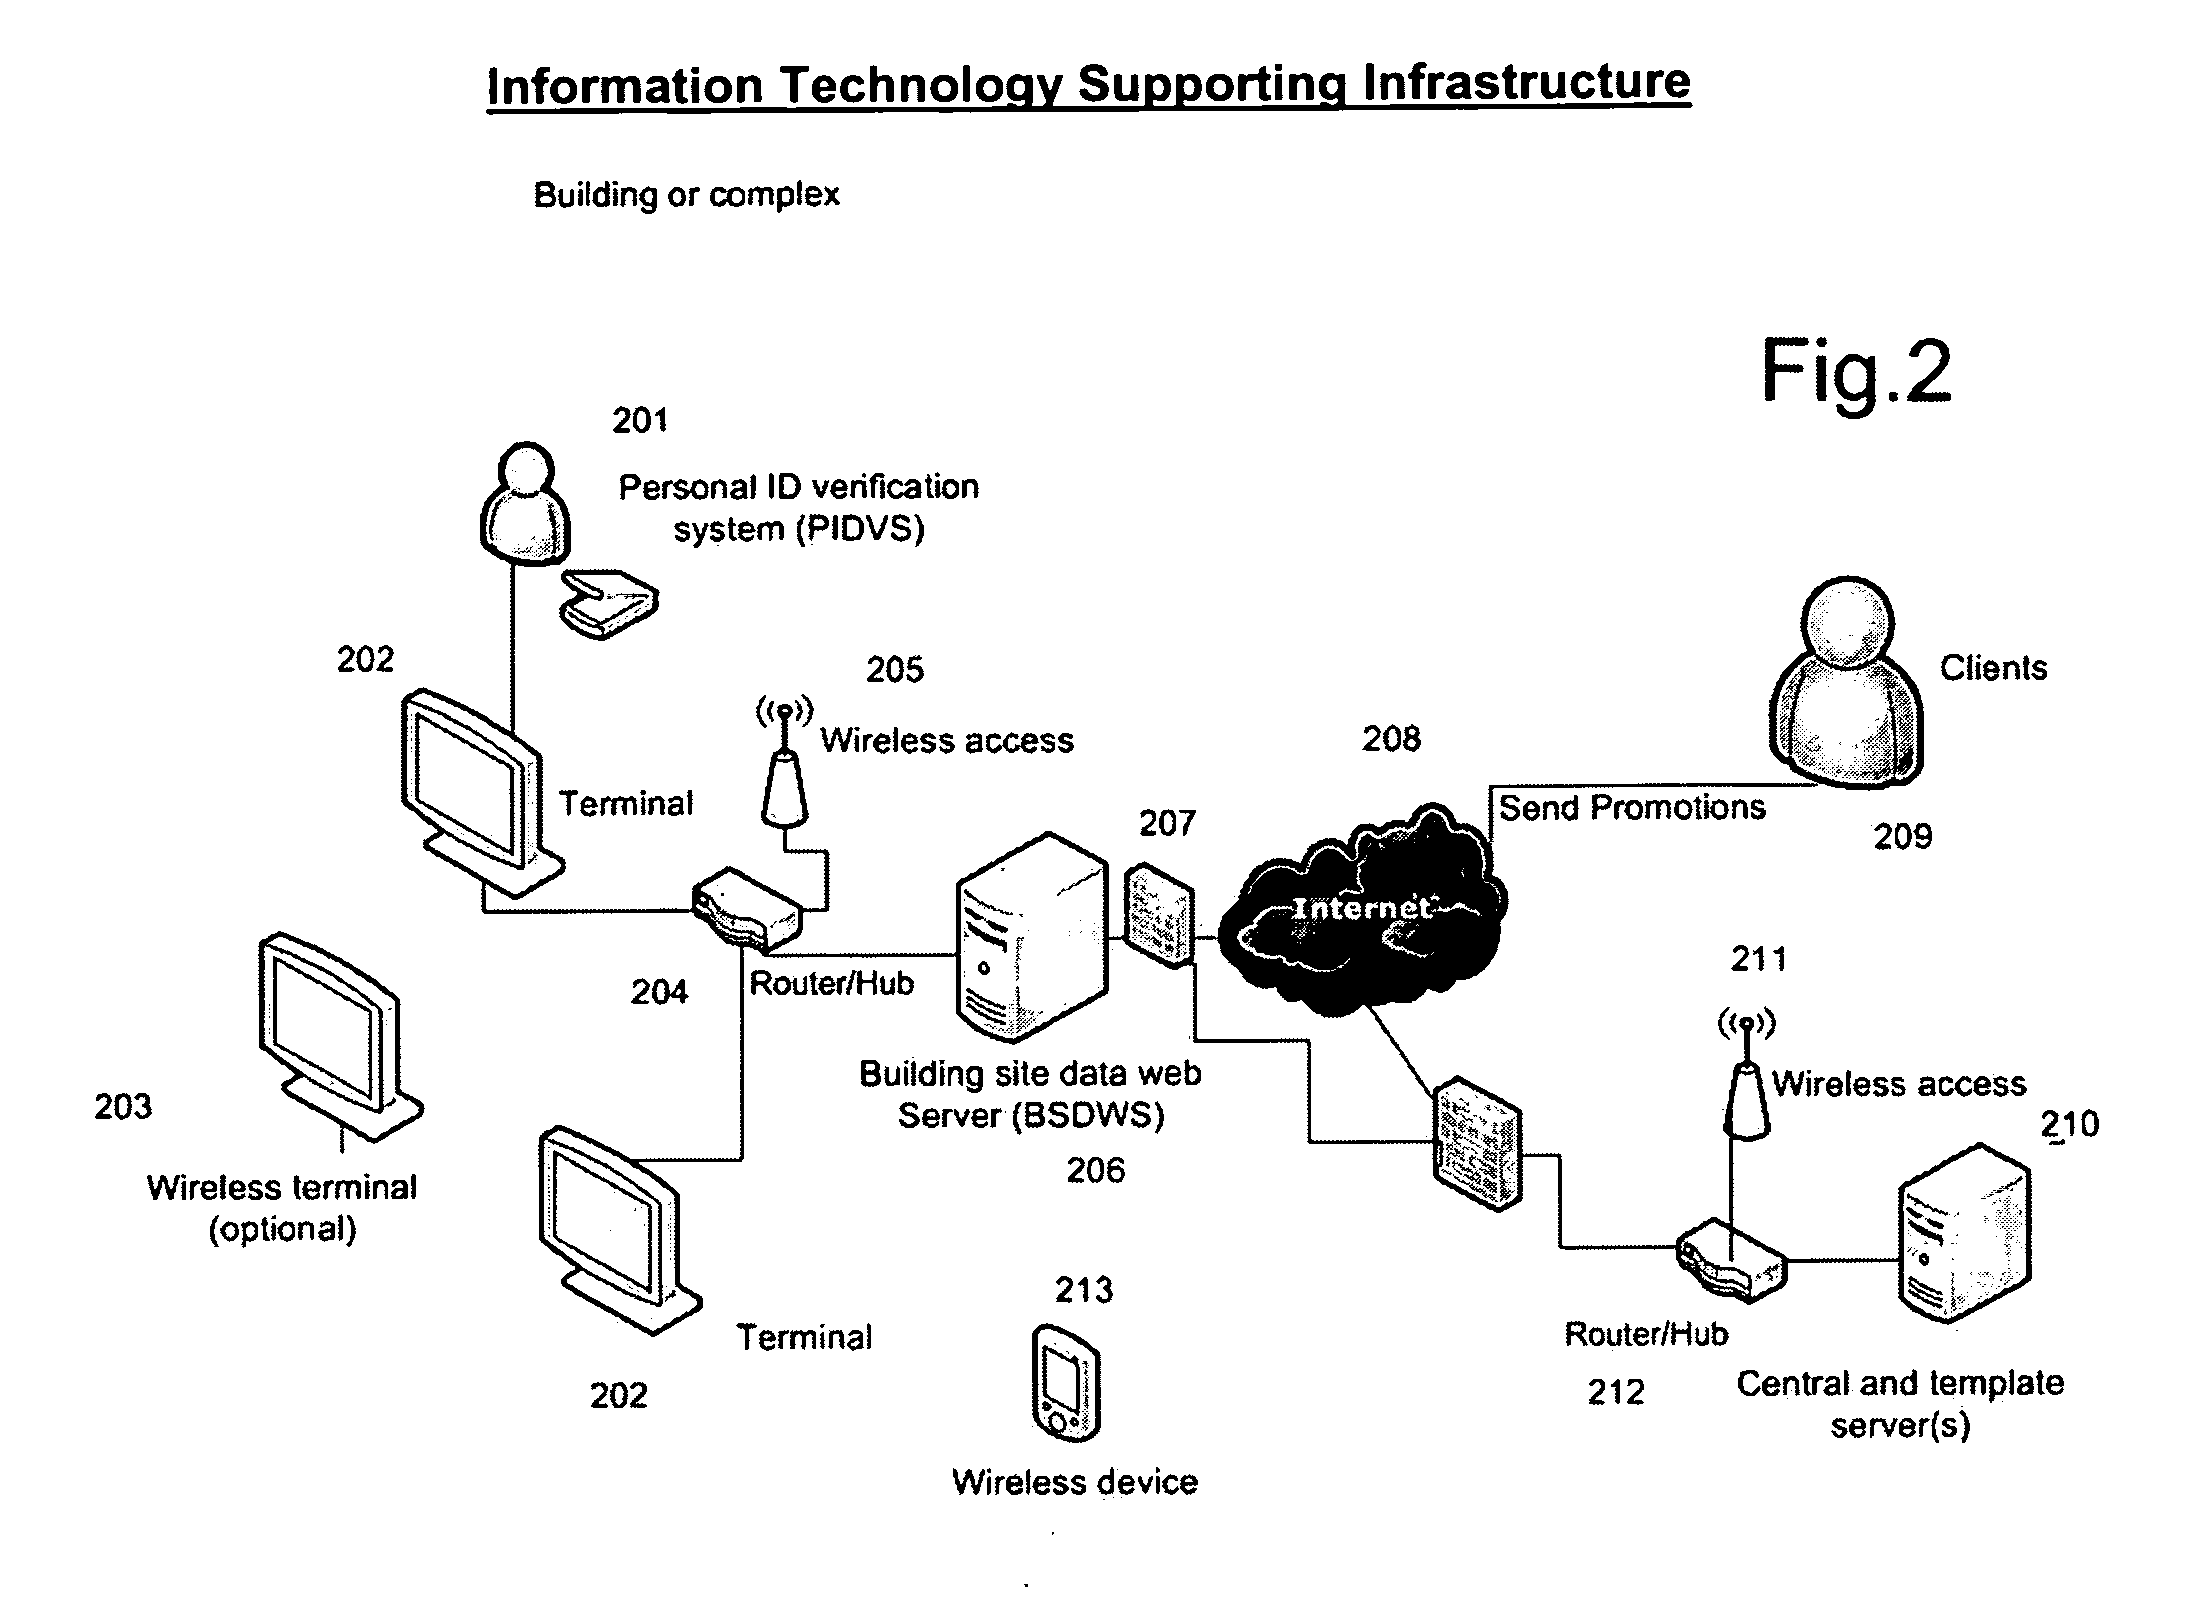 Method for providing location and promotional information associated with a building complex